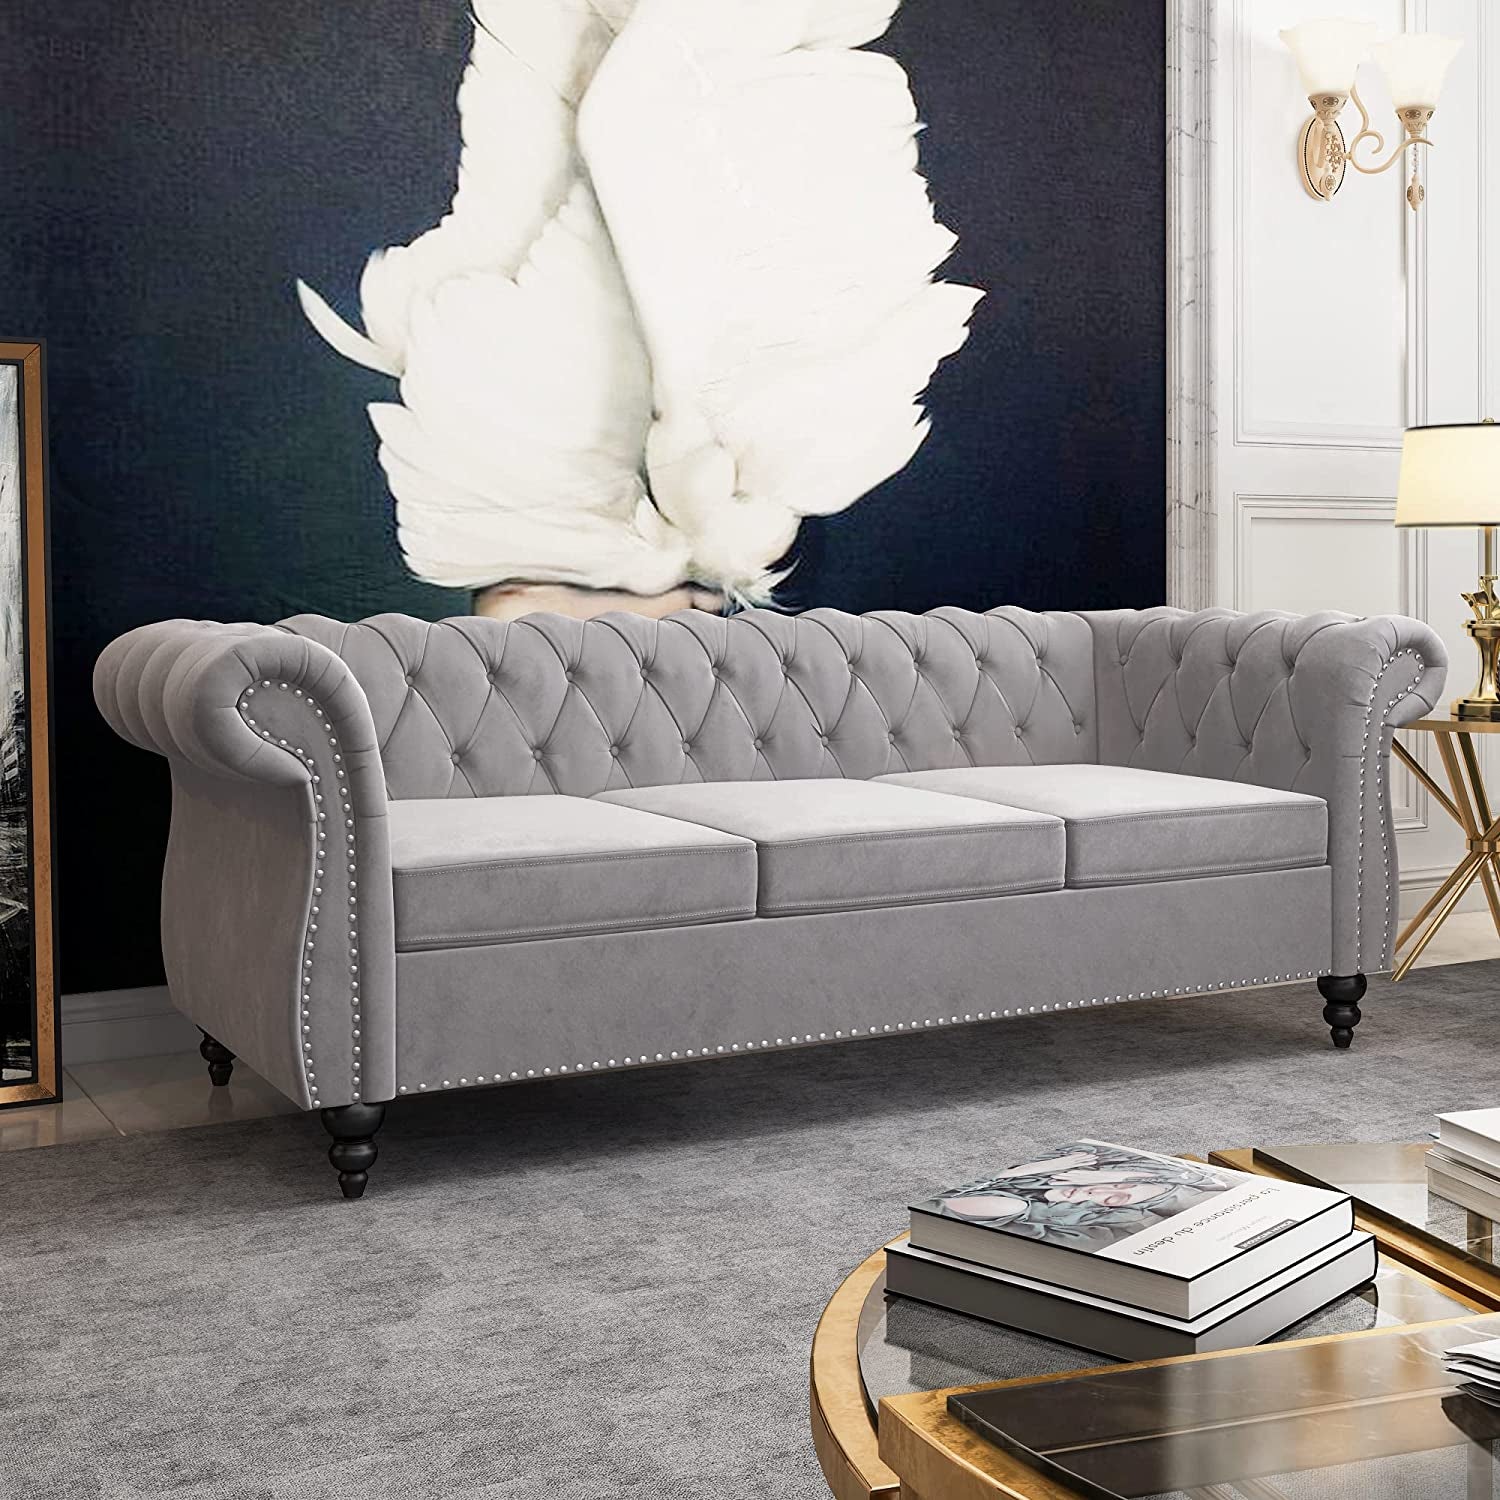 "Classic Comfort 3-Seater: Tufted Chesterfield Sofa for Living Room"